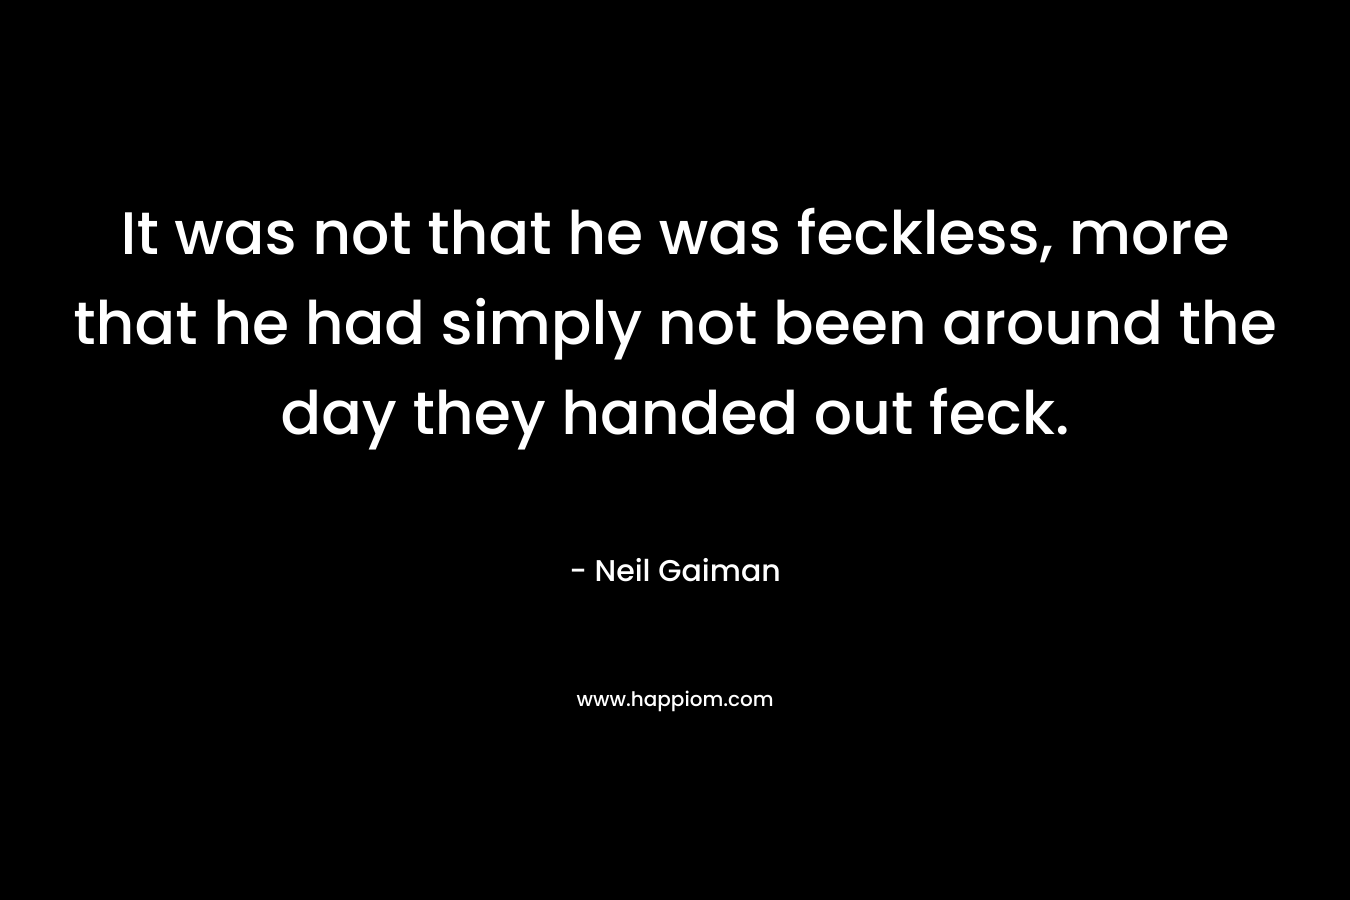 It was not that he was feckless, more that he had simply not been around the day they handed out feck. – Neil Gaiman